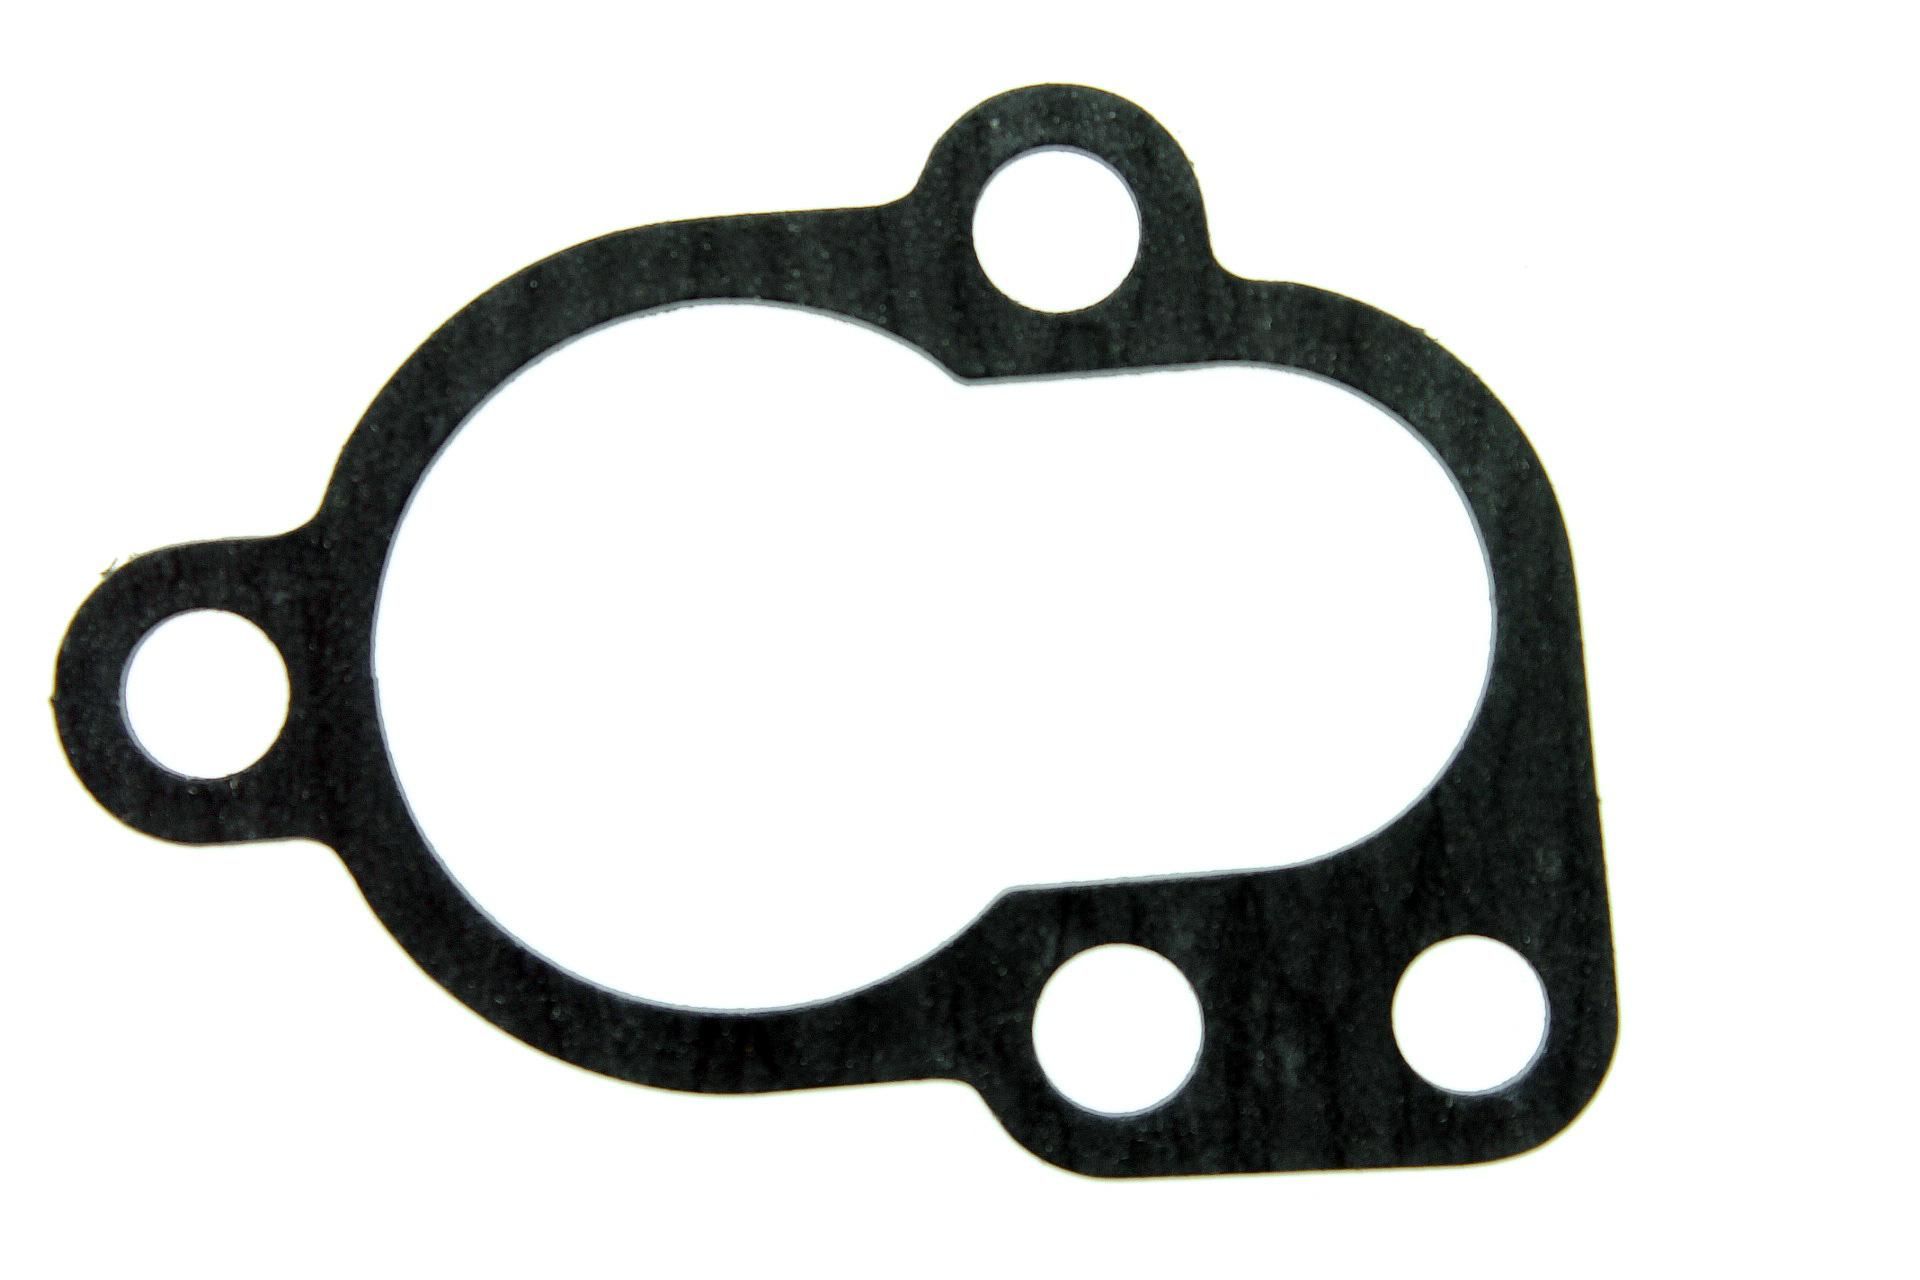 655-12414-00-00 Superseded by 655-12414-A1-00 - GASKET,COVER